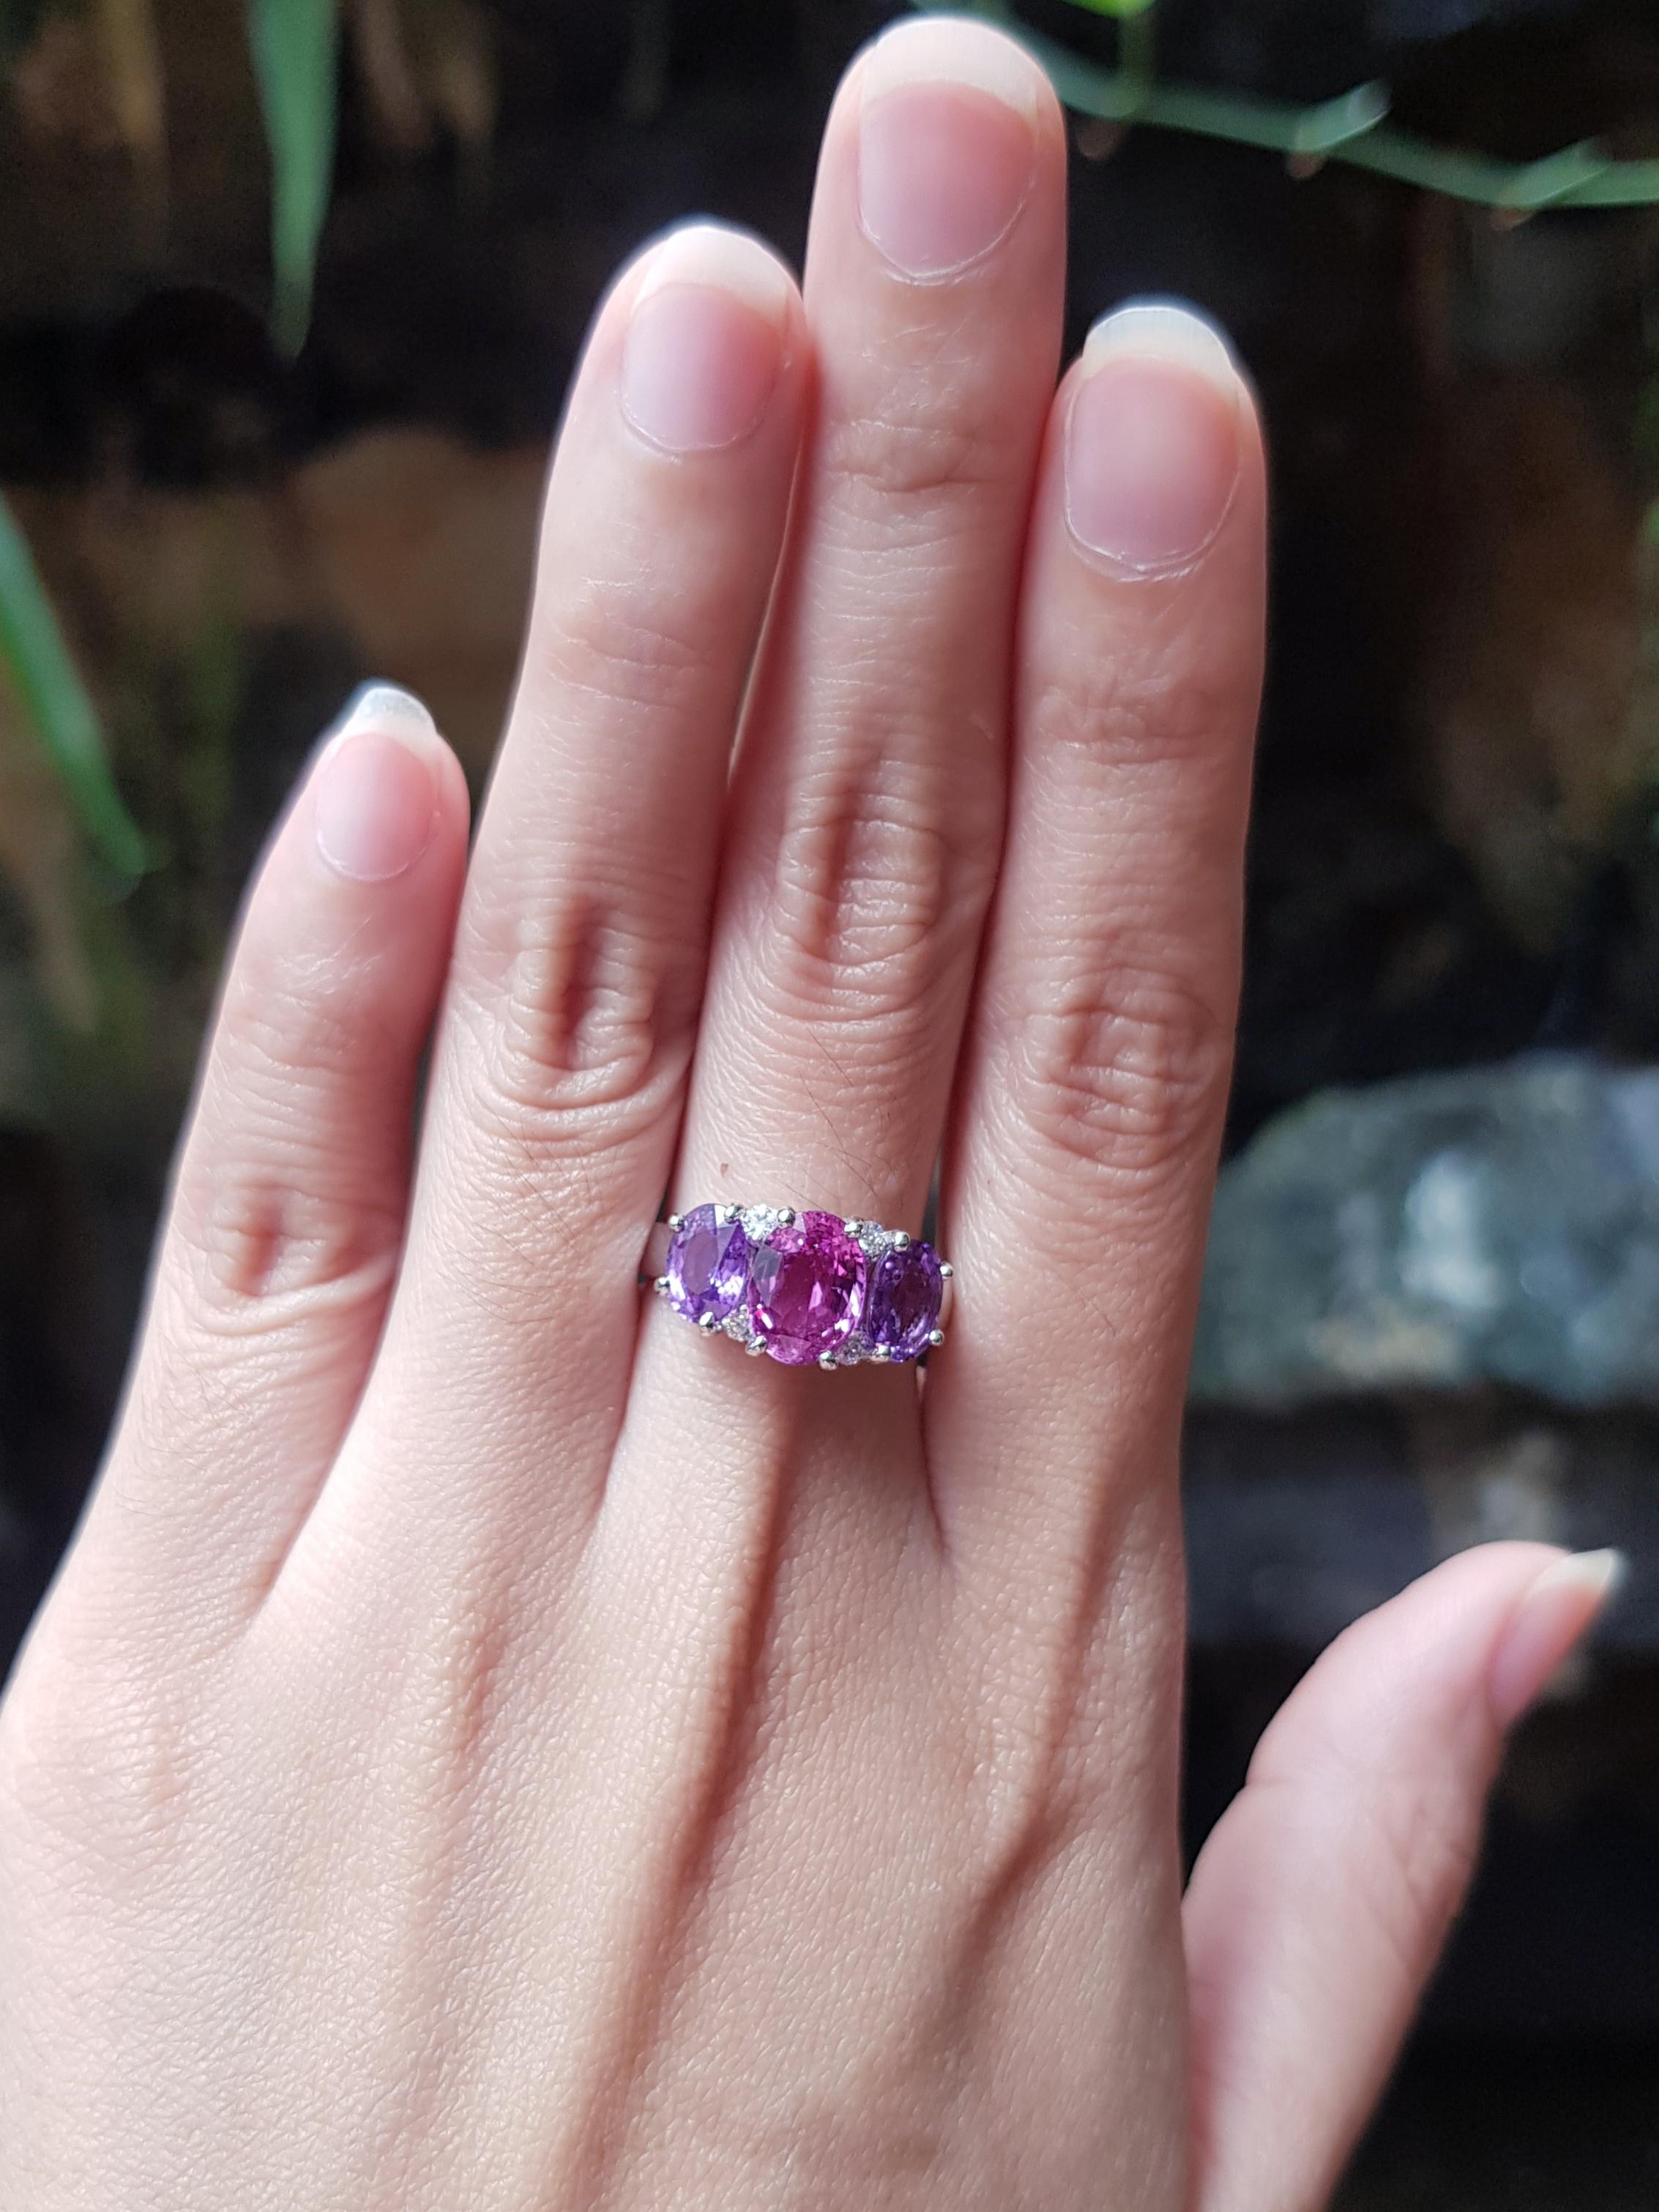 Pink Sapphire 2.23 carats with Purple Sapphire 2.11 carats and Diamond 0.13 carat Ring set in 18 Karat White Gold Settings

Width:  1.7 cm 
Length: 0.8 cm
Ring Size: 54
Total Weight: 6.14 grams

